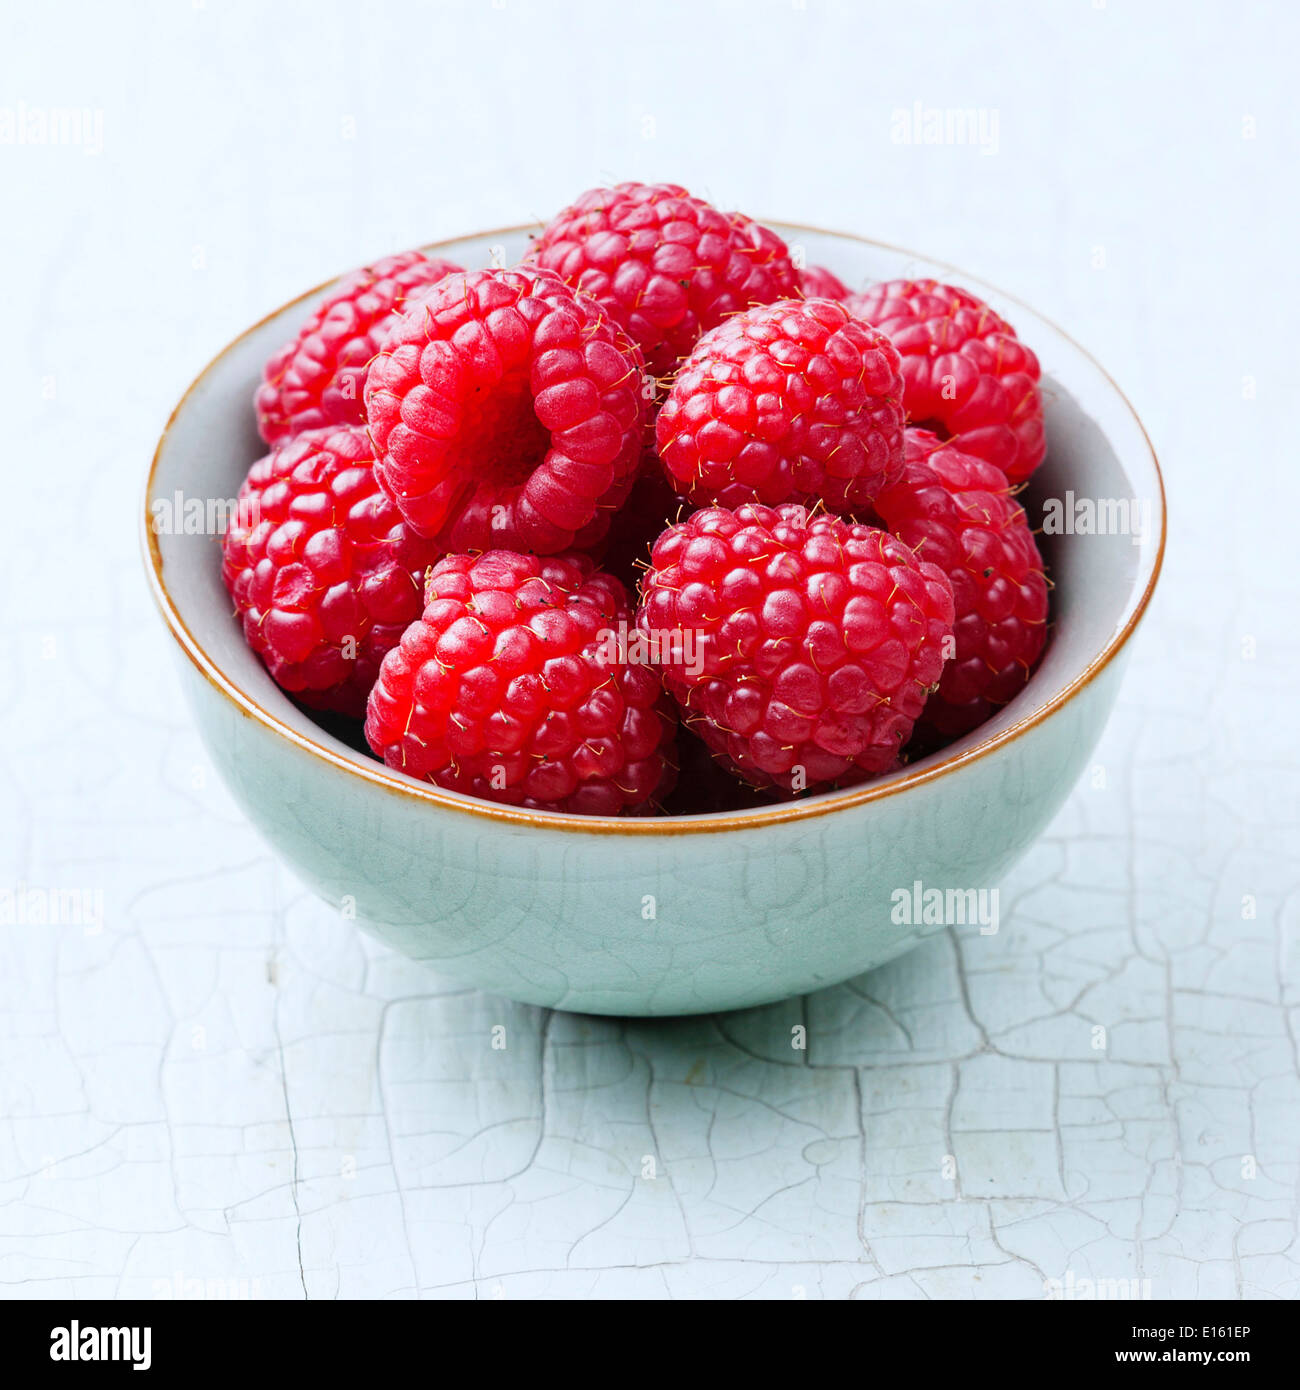 Raspberries in bowl on blue background Stock Photo